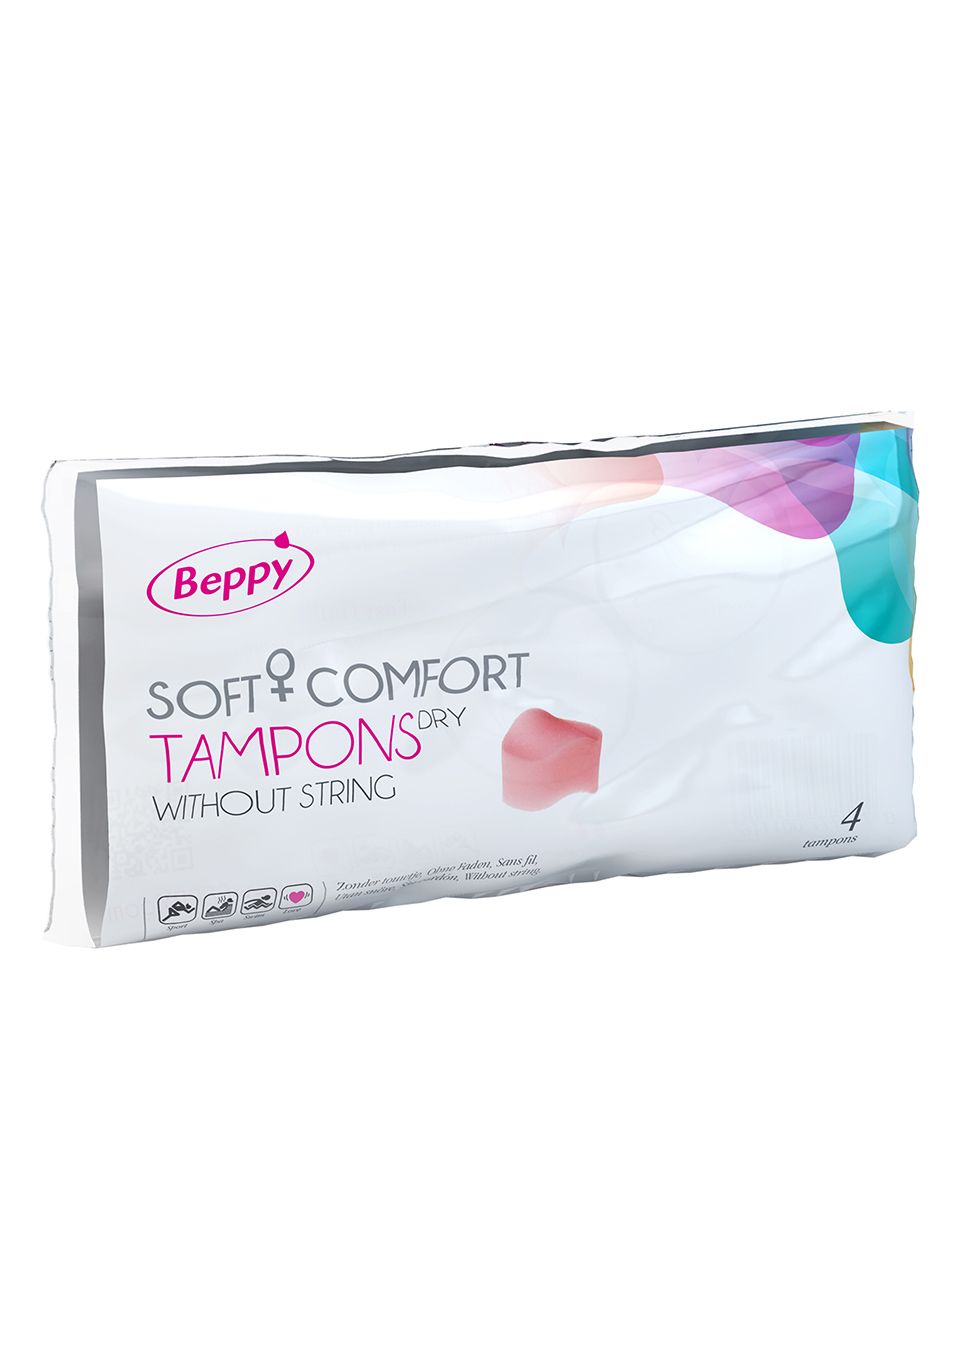 Tampony-BEPPY SOFT&COMFORT TAMPONS DRY 4PCS